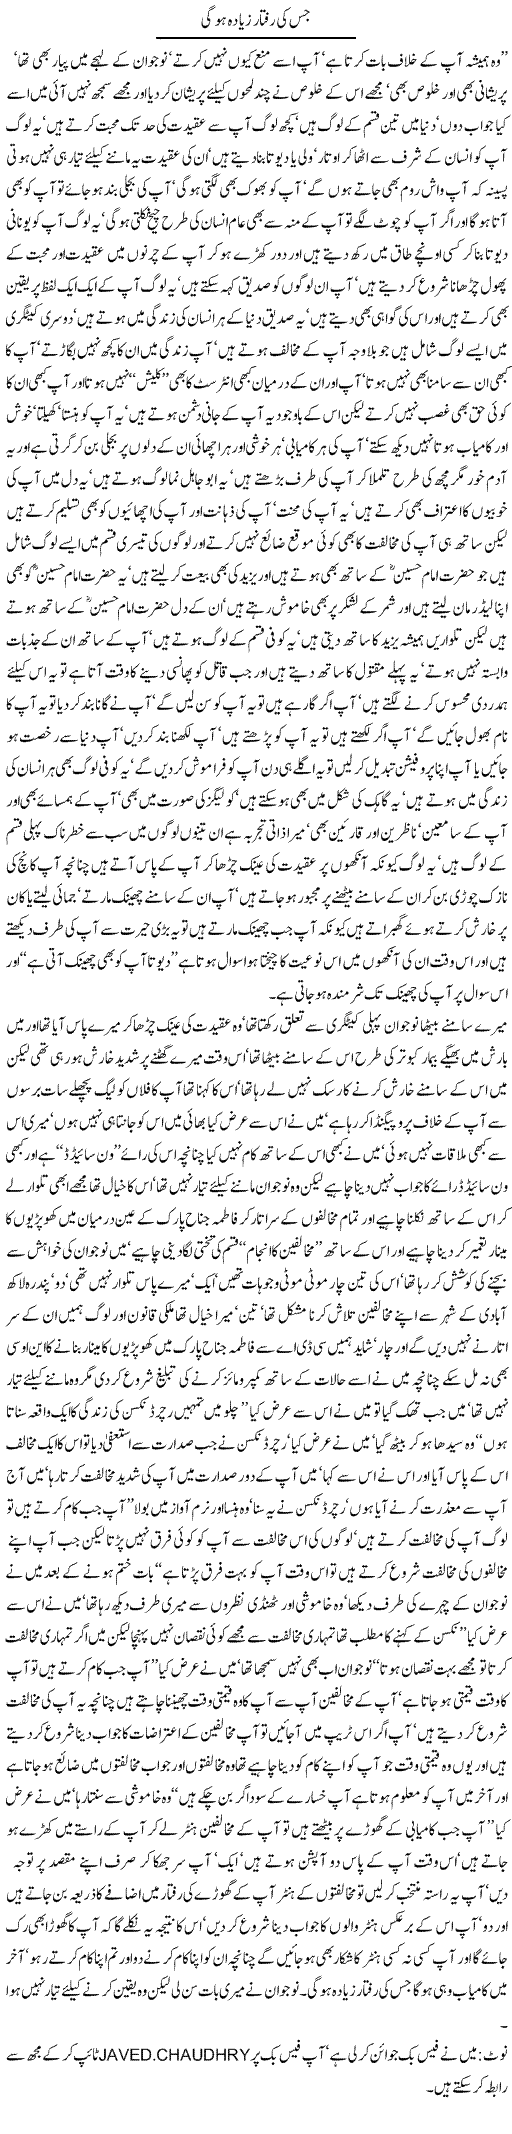 Fast Speed Express Column Javed Chaudhry 10 October 2010